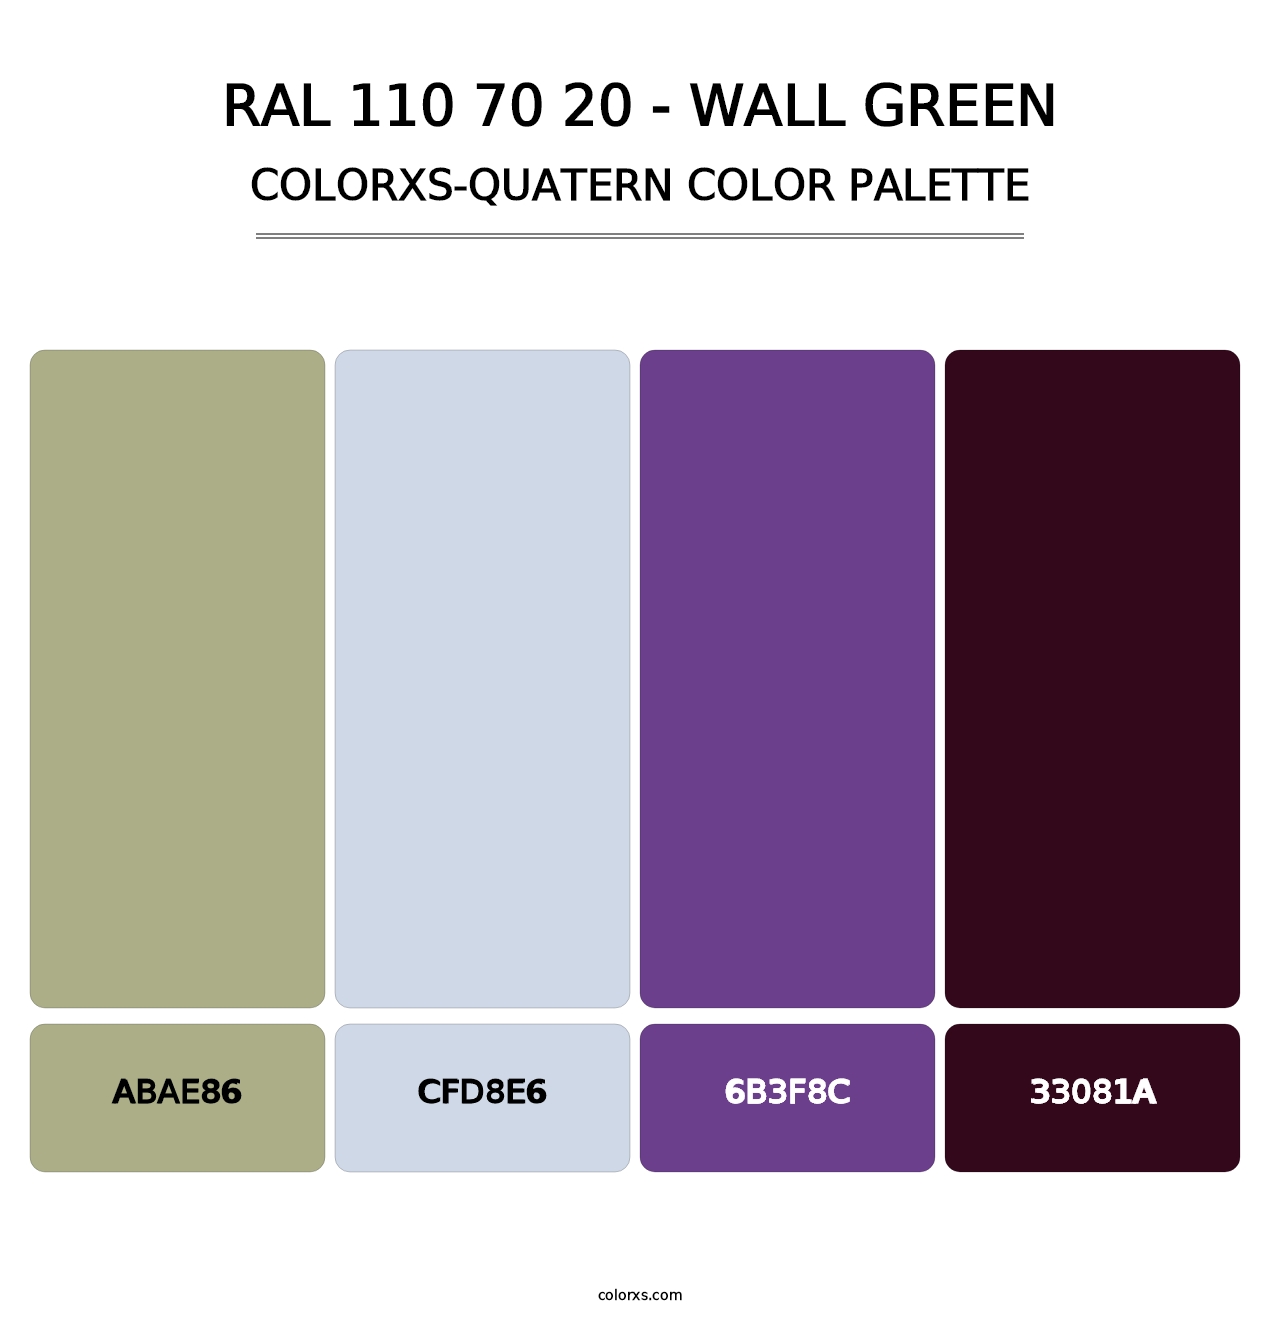 RAL 110 70 20 - Wall Green - Colorxs Quatern Palette